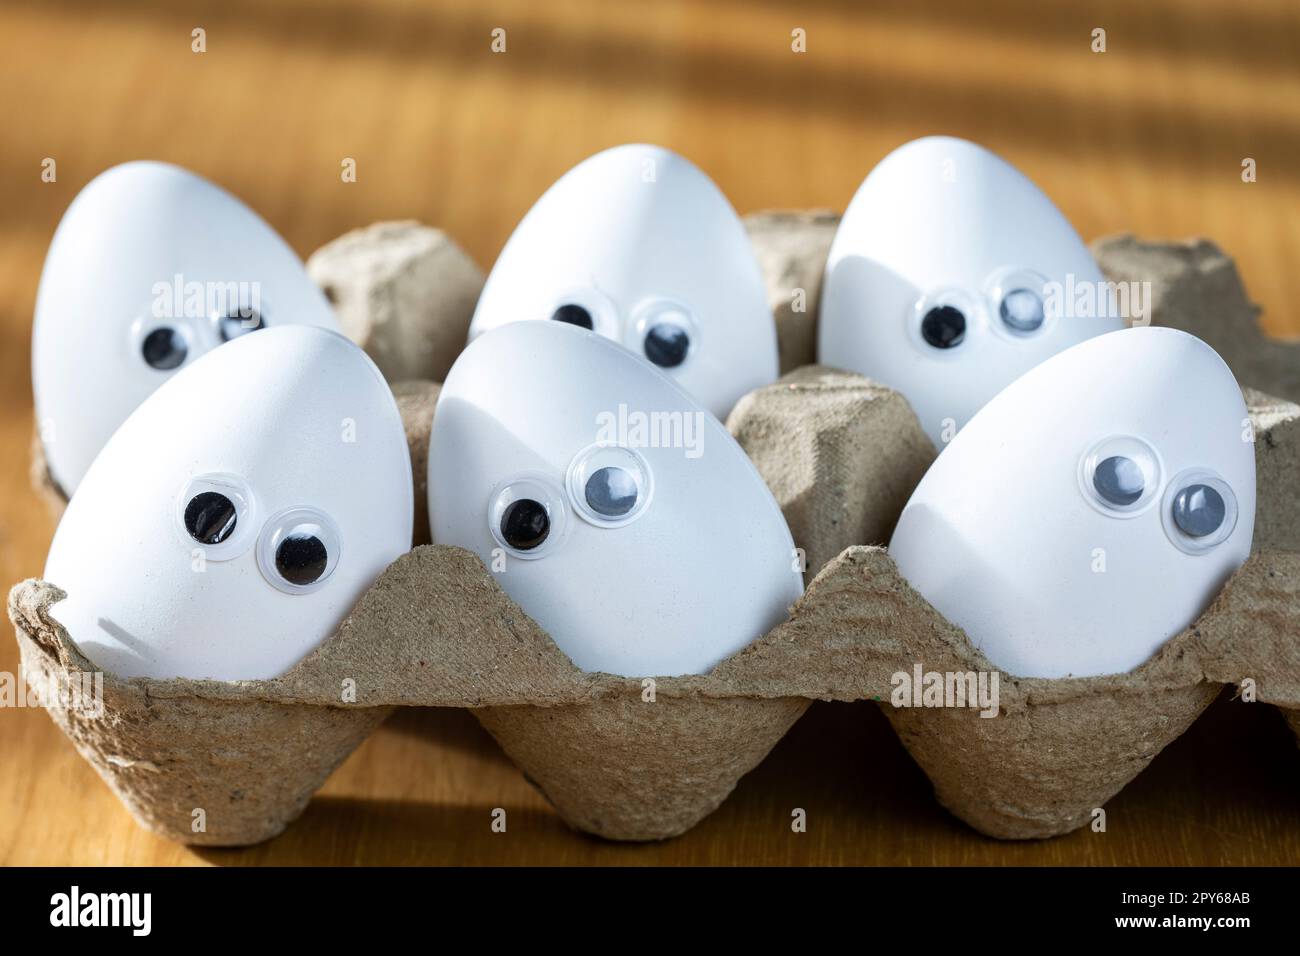 Funny faces on white eggs in carton box with organic chicken eggs on kitchen table closeup big animation eyes. humor, food and easter holiday concept. Stock Photo